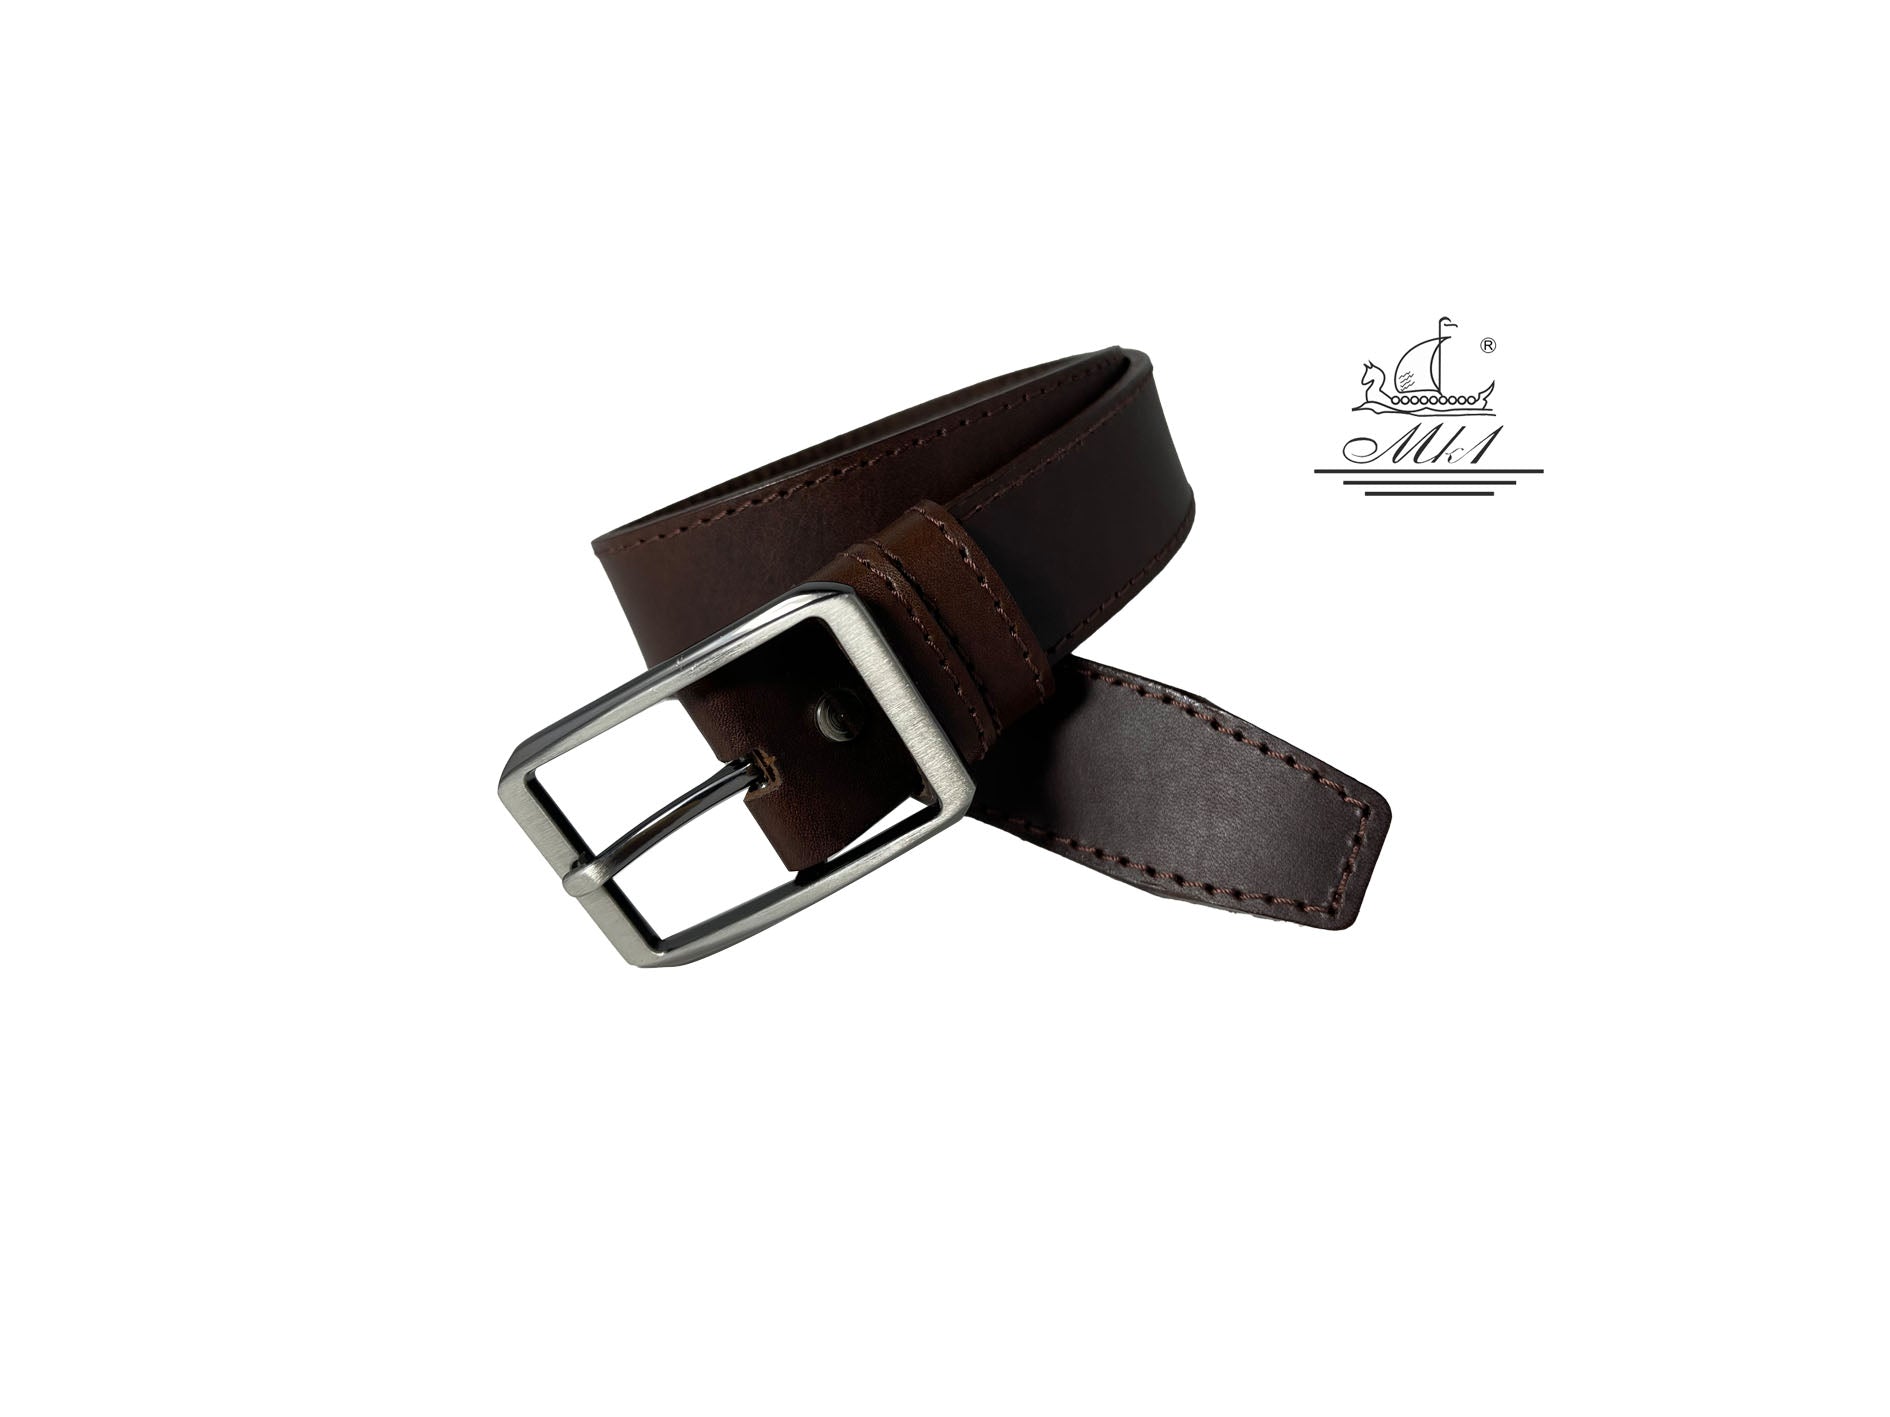 Unisex 3,5cm wide belt handcrafted from brown leather with sticking design. A001/35BR/DG